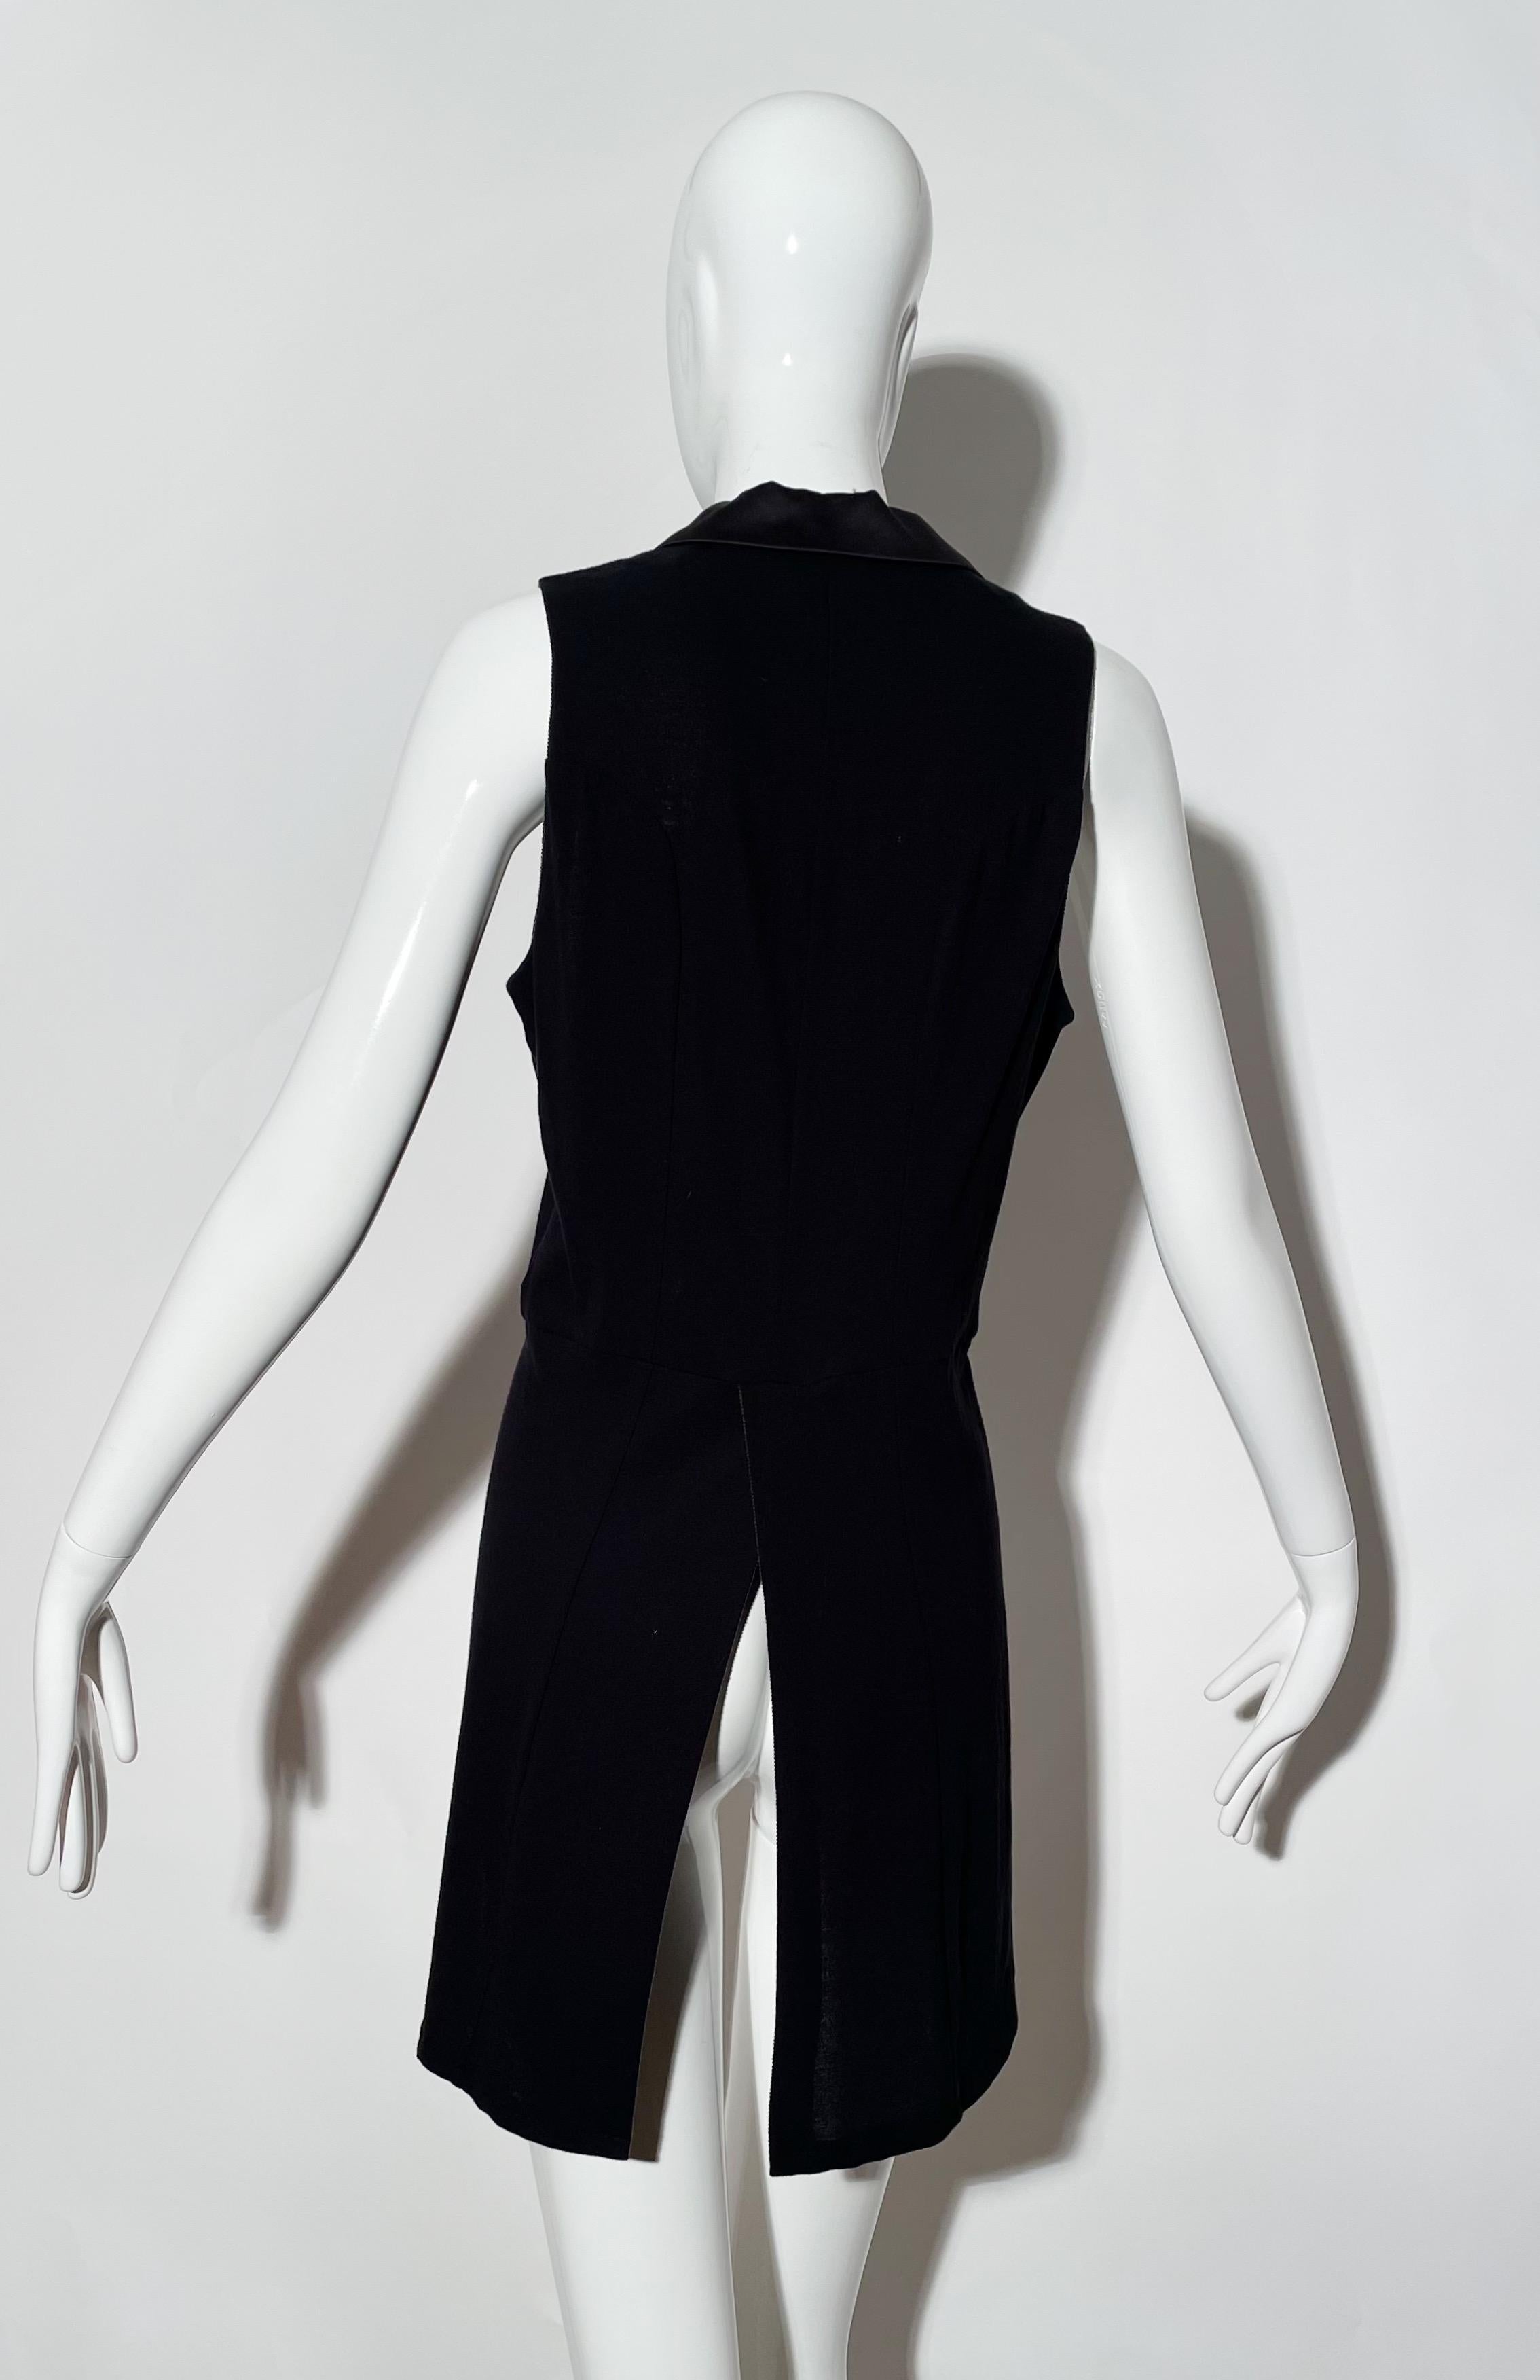 Sacai Black Tailcoat Vest In Excellent Condition For Sale In Waterford, MI